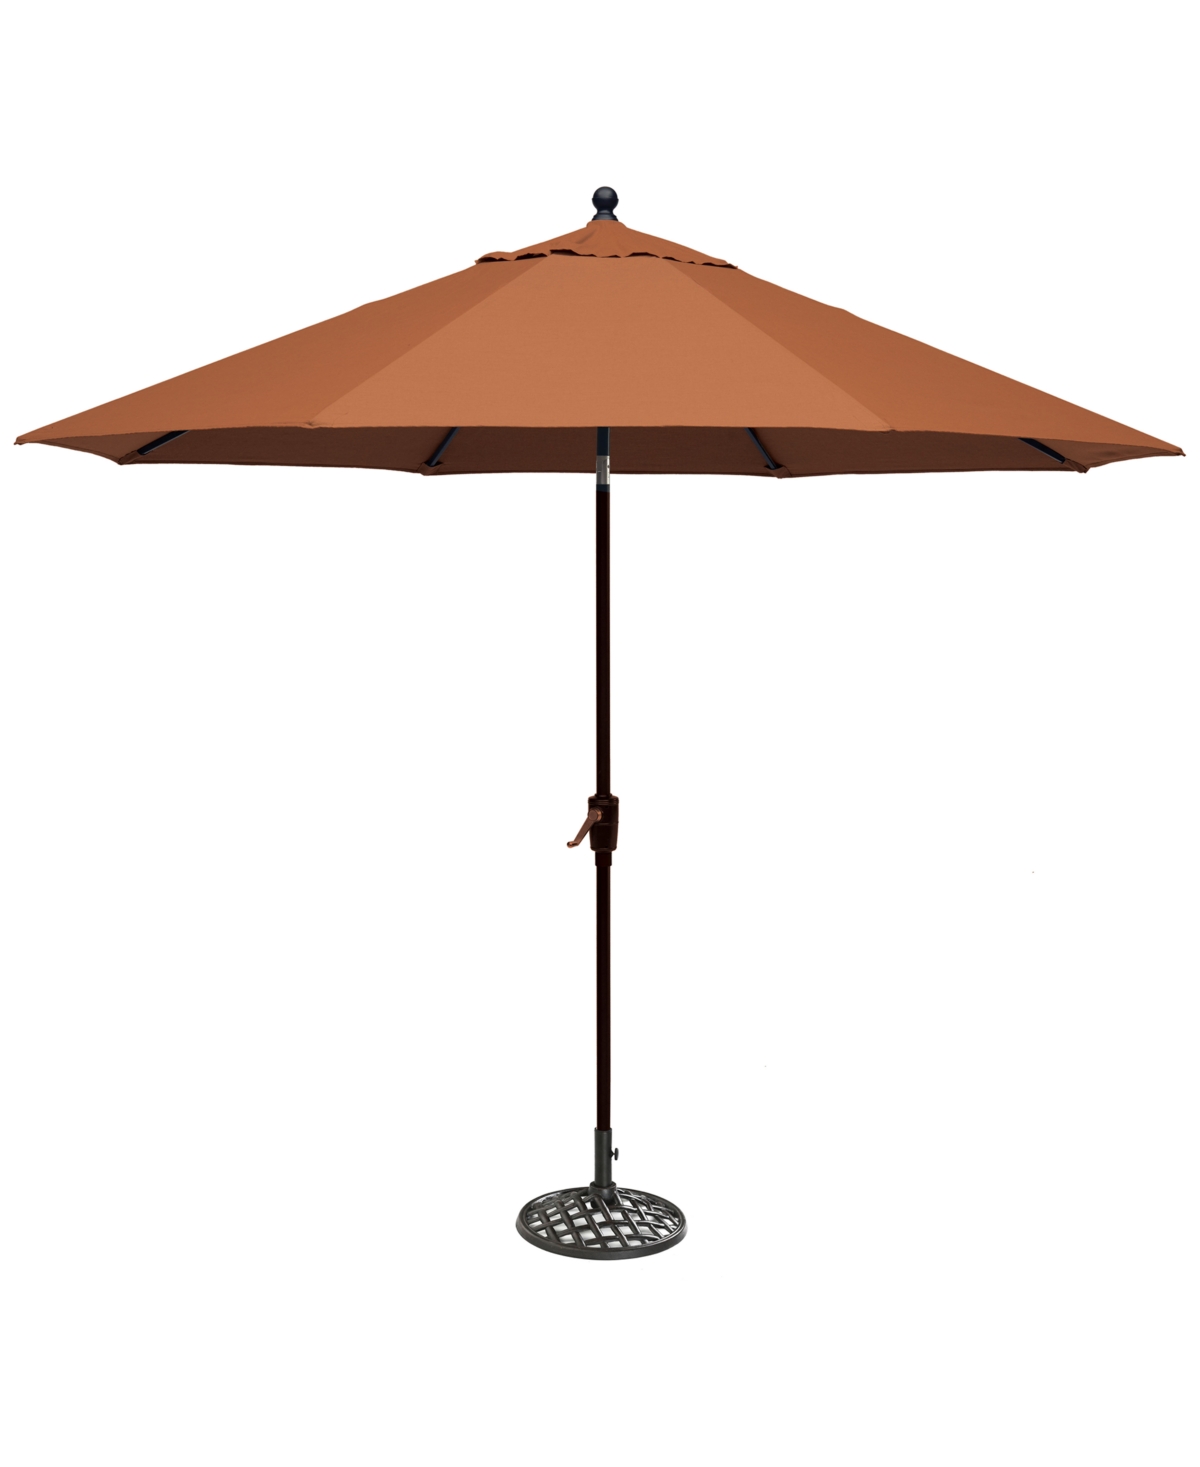 Chateau Outdoor 11 Push Button Tilt Umbrella with Base, Created for Macys